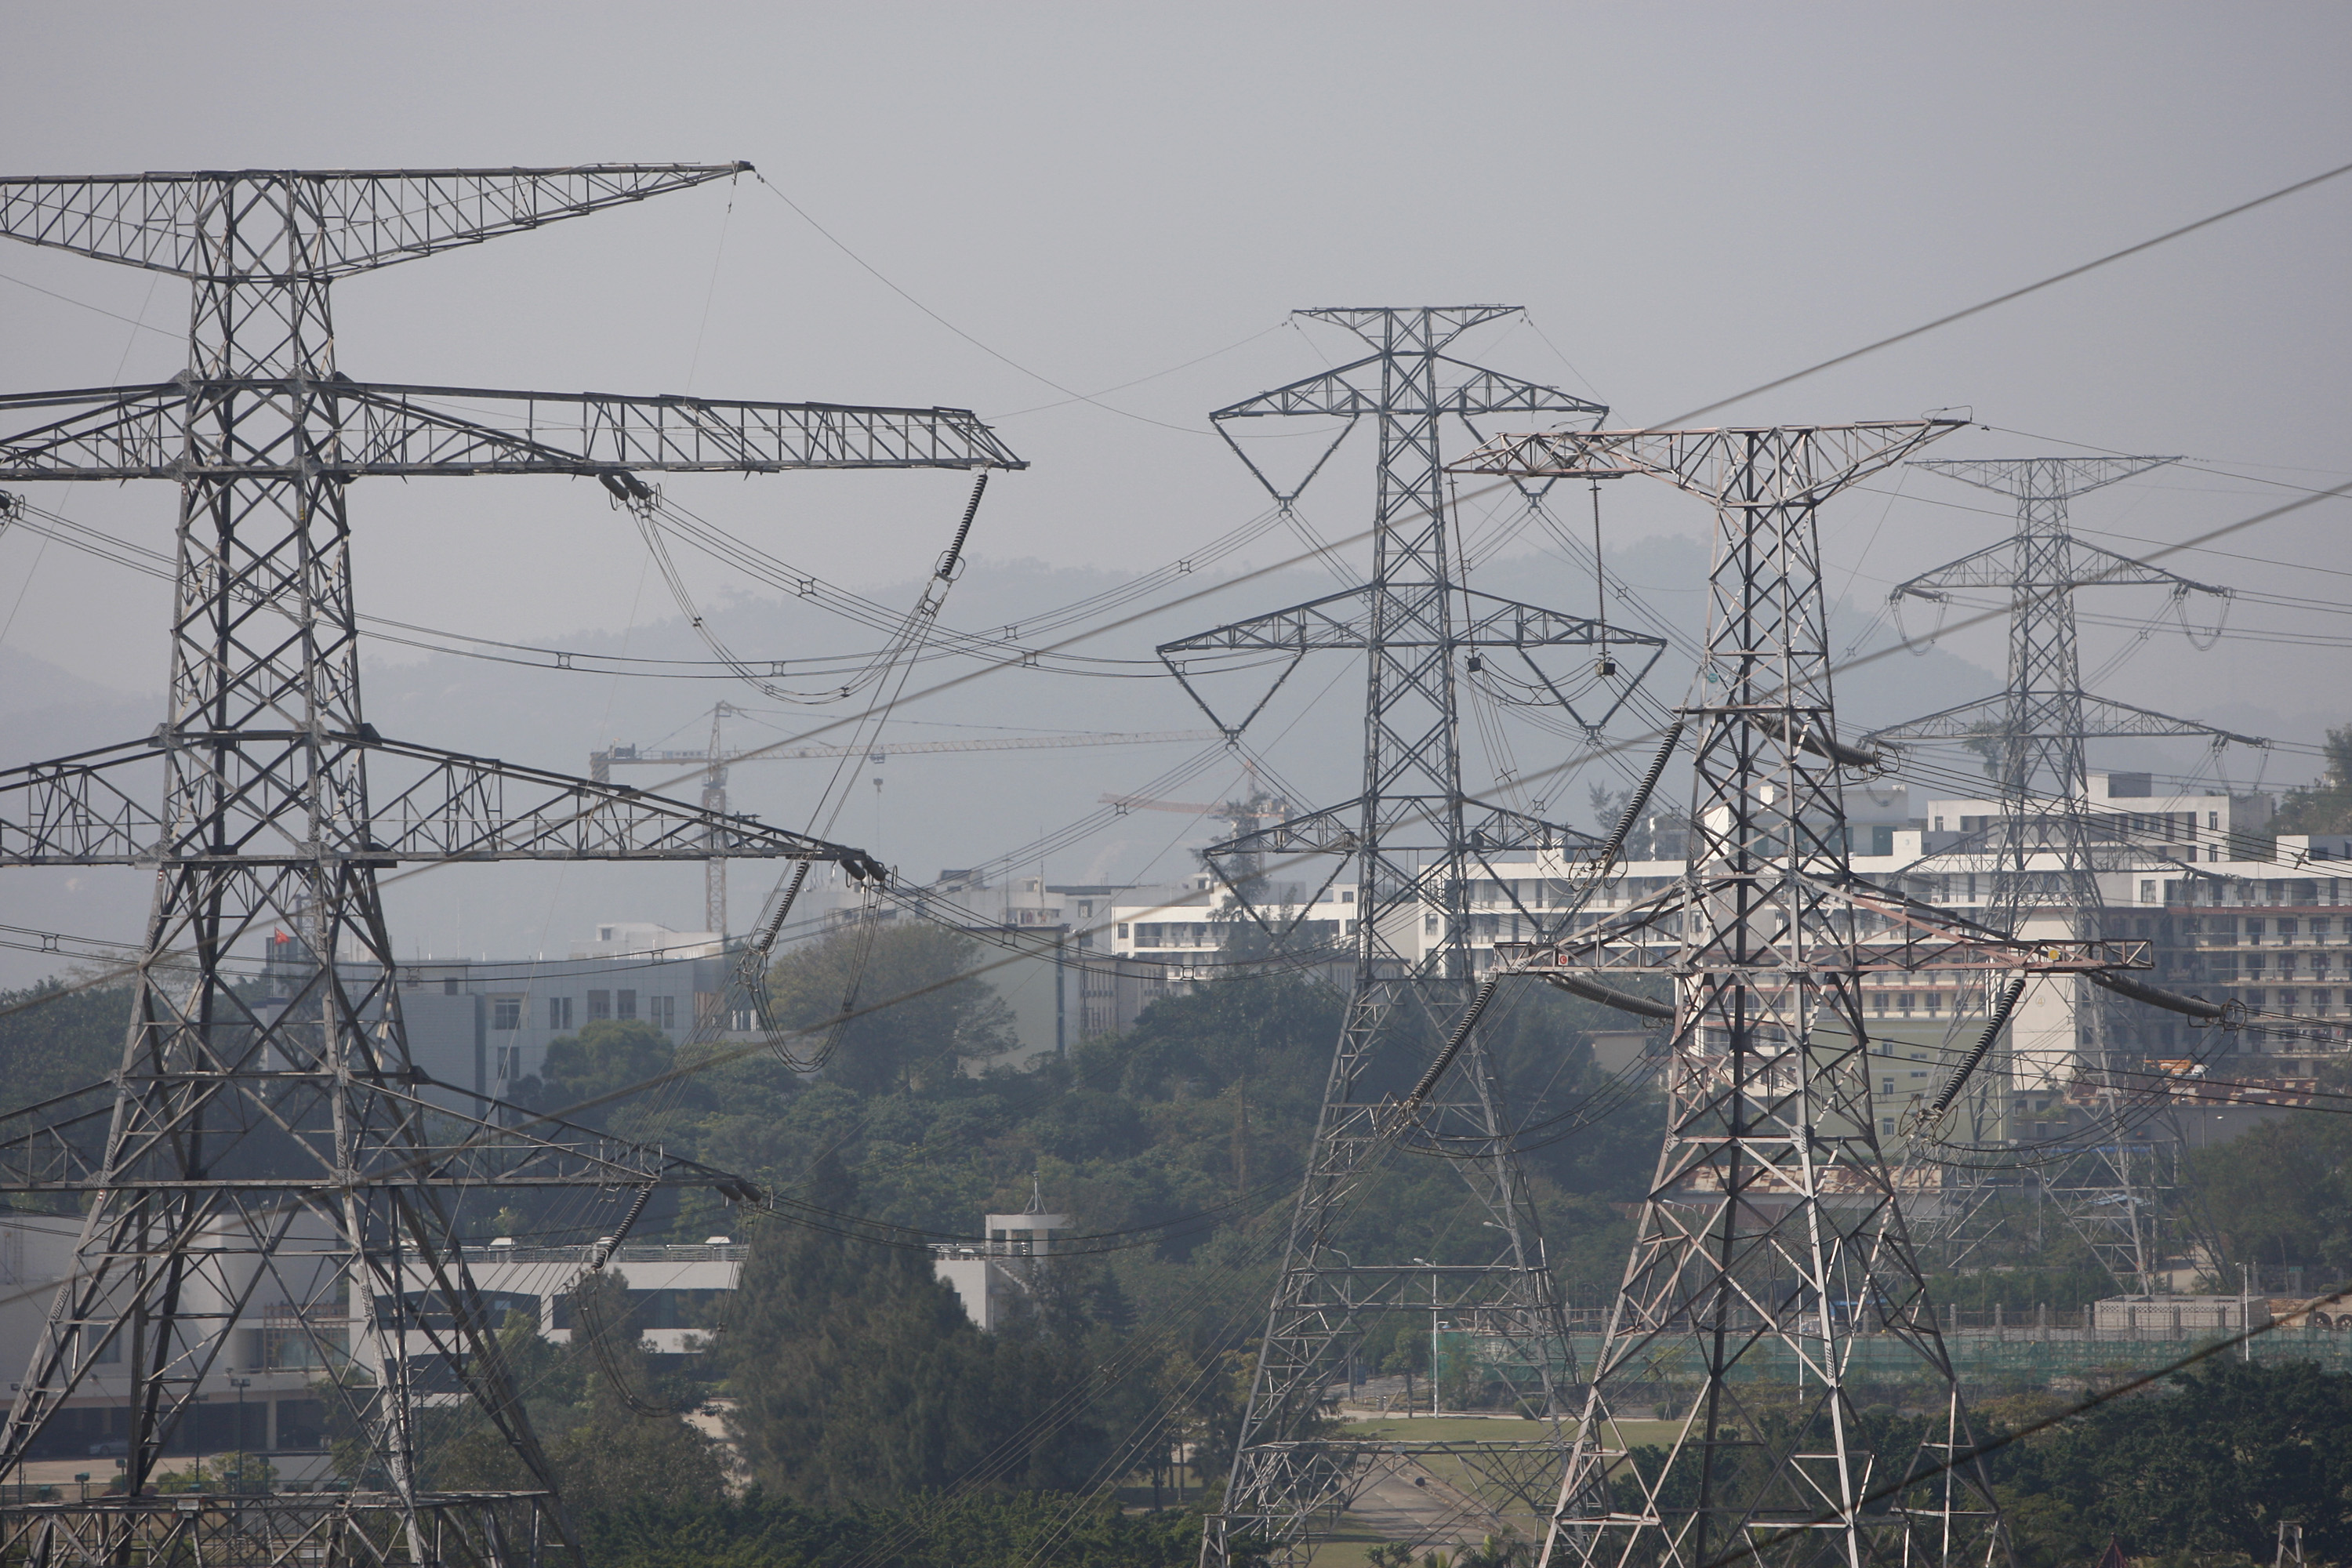 Power lines hang from electricity pylons in Daya Bay, near Shenzhen, China, on Tuesday, Dec. 22, 2009. The Daya Bay Nuclear Power Plant, which supplies 70% of CLP Holdings Ltd.'s electric supply, was the first commercial nuclear power plant on China's mainland. Photographer: Scott Eells/Bloomberg